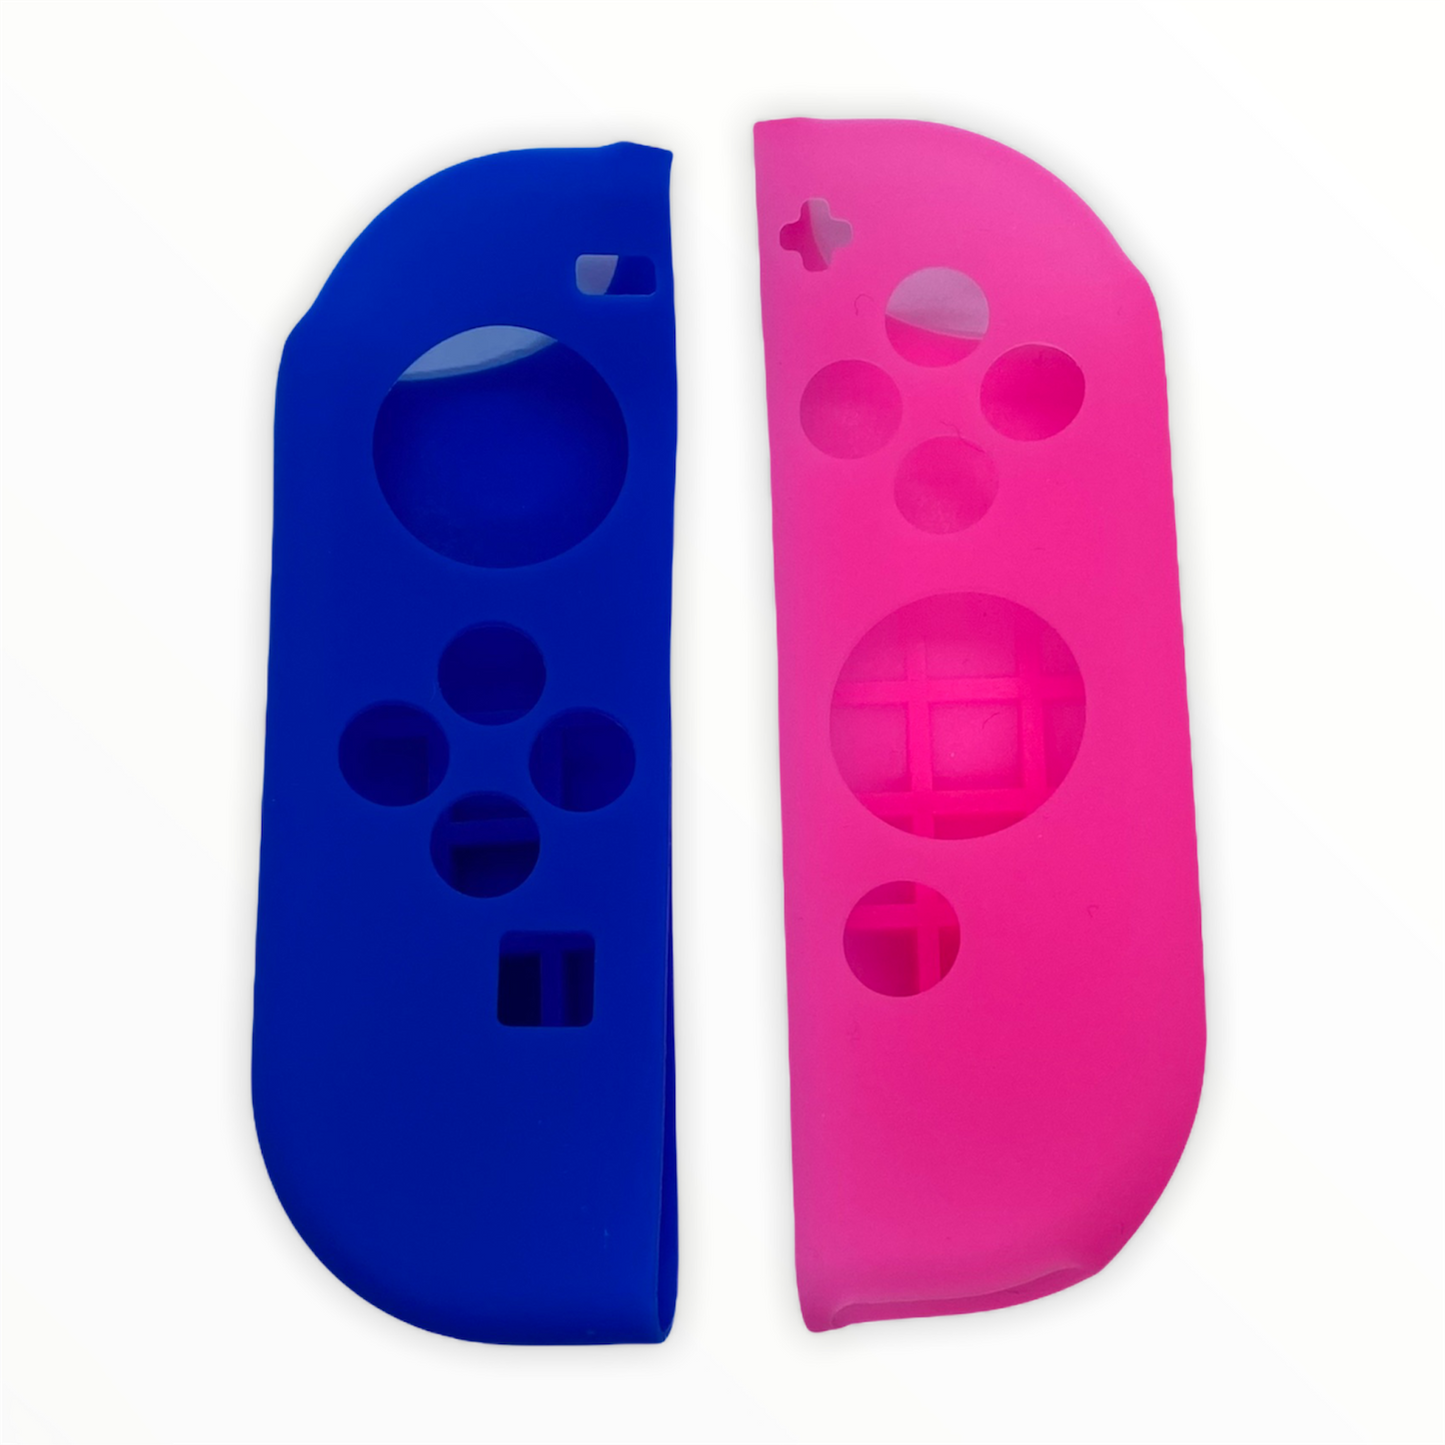 JenDore Blue & Pink Silicone Nintendo Switch Joy-con Protective Shell Covers